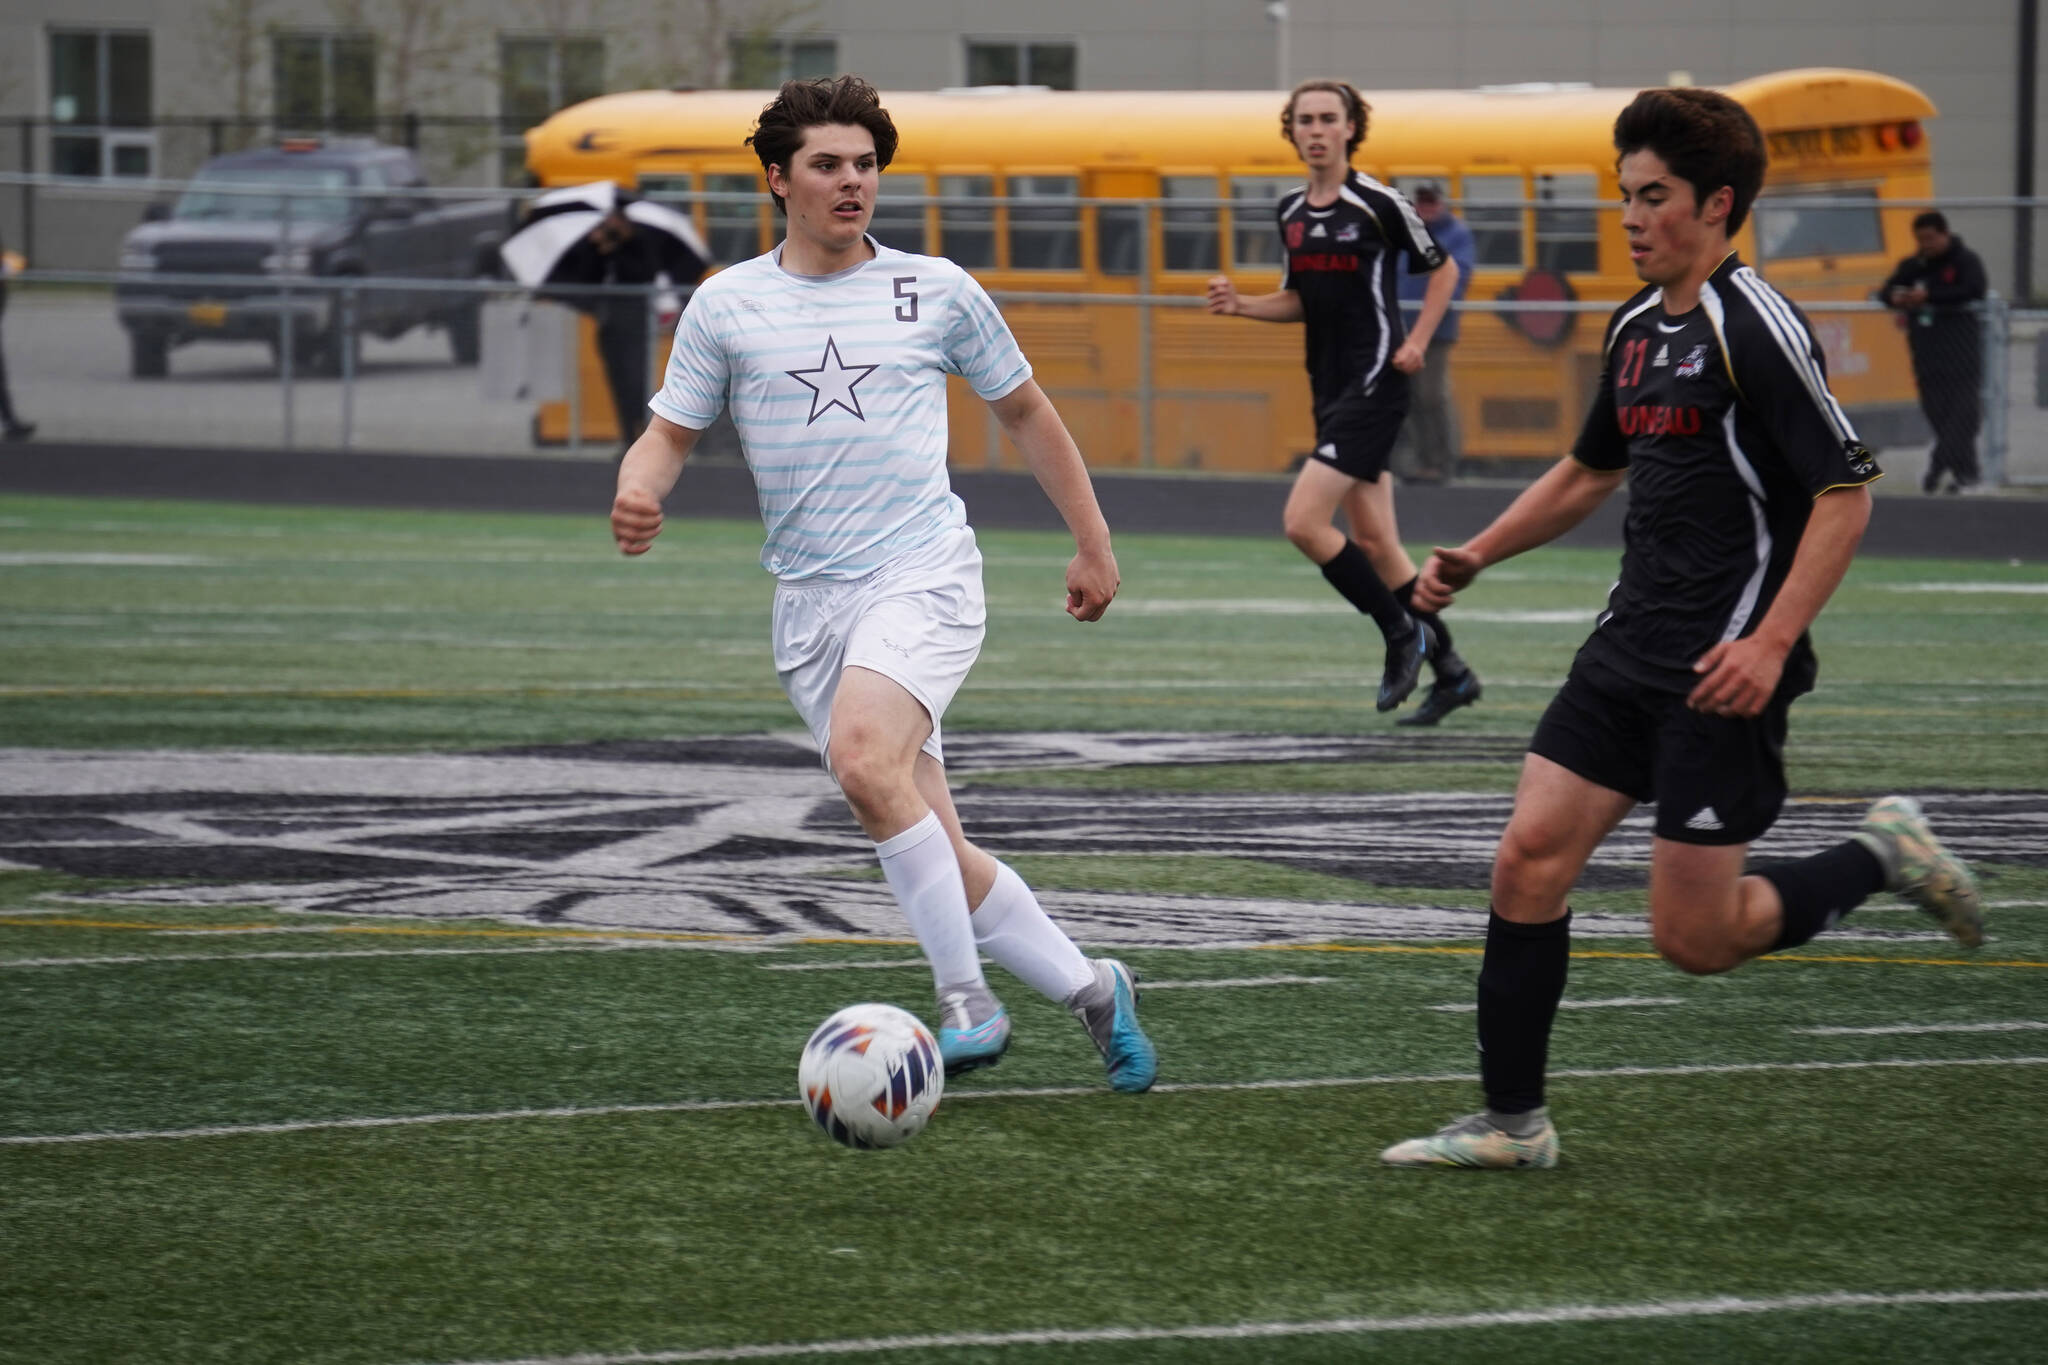 Soldotna’s Gehret Medcoff and Juneau-Douglas’ Gabriel Cheng race for the ball during the Division II Soccer State Championship on Saturday, May 27, 2023, at West Anchorage High School in Anchorage, Alaska. (Jake Dye/Peninsula Clarion)